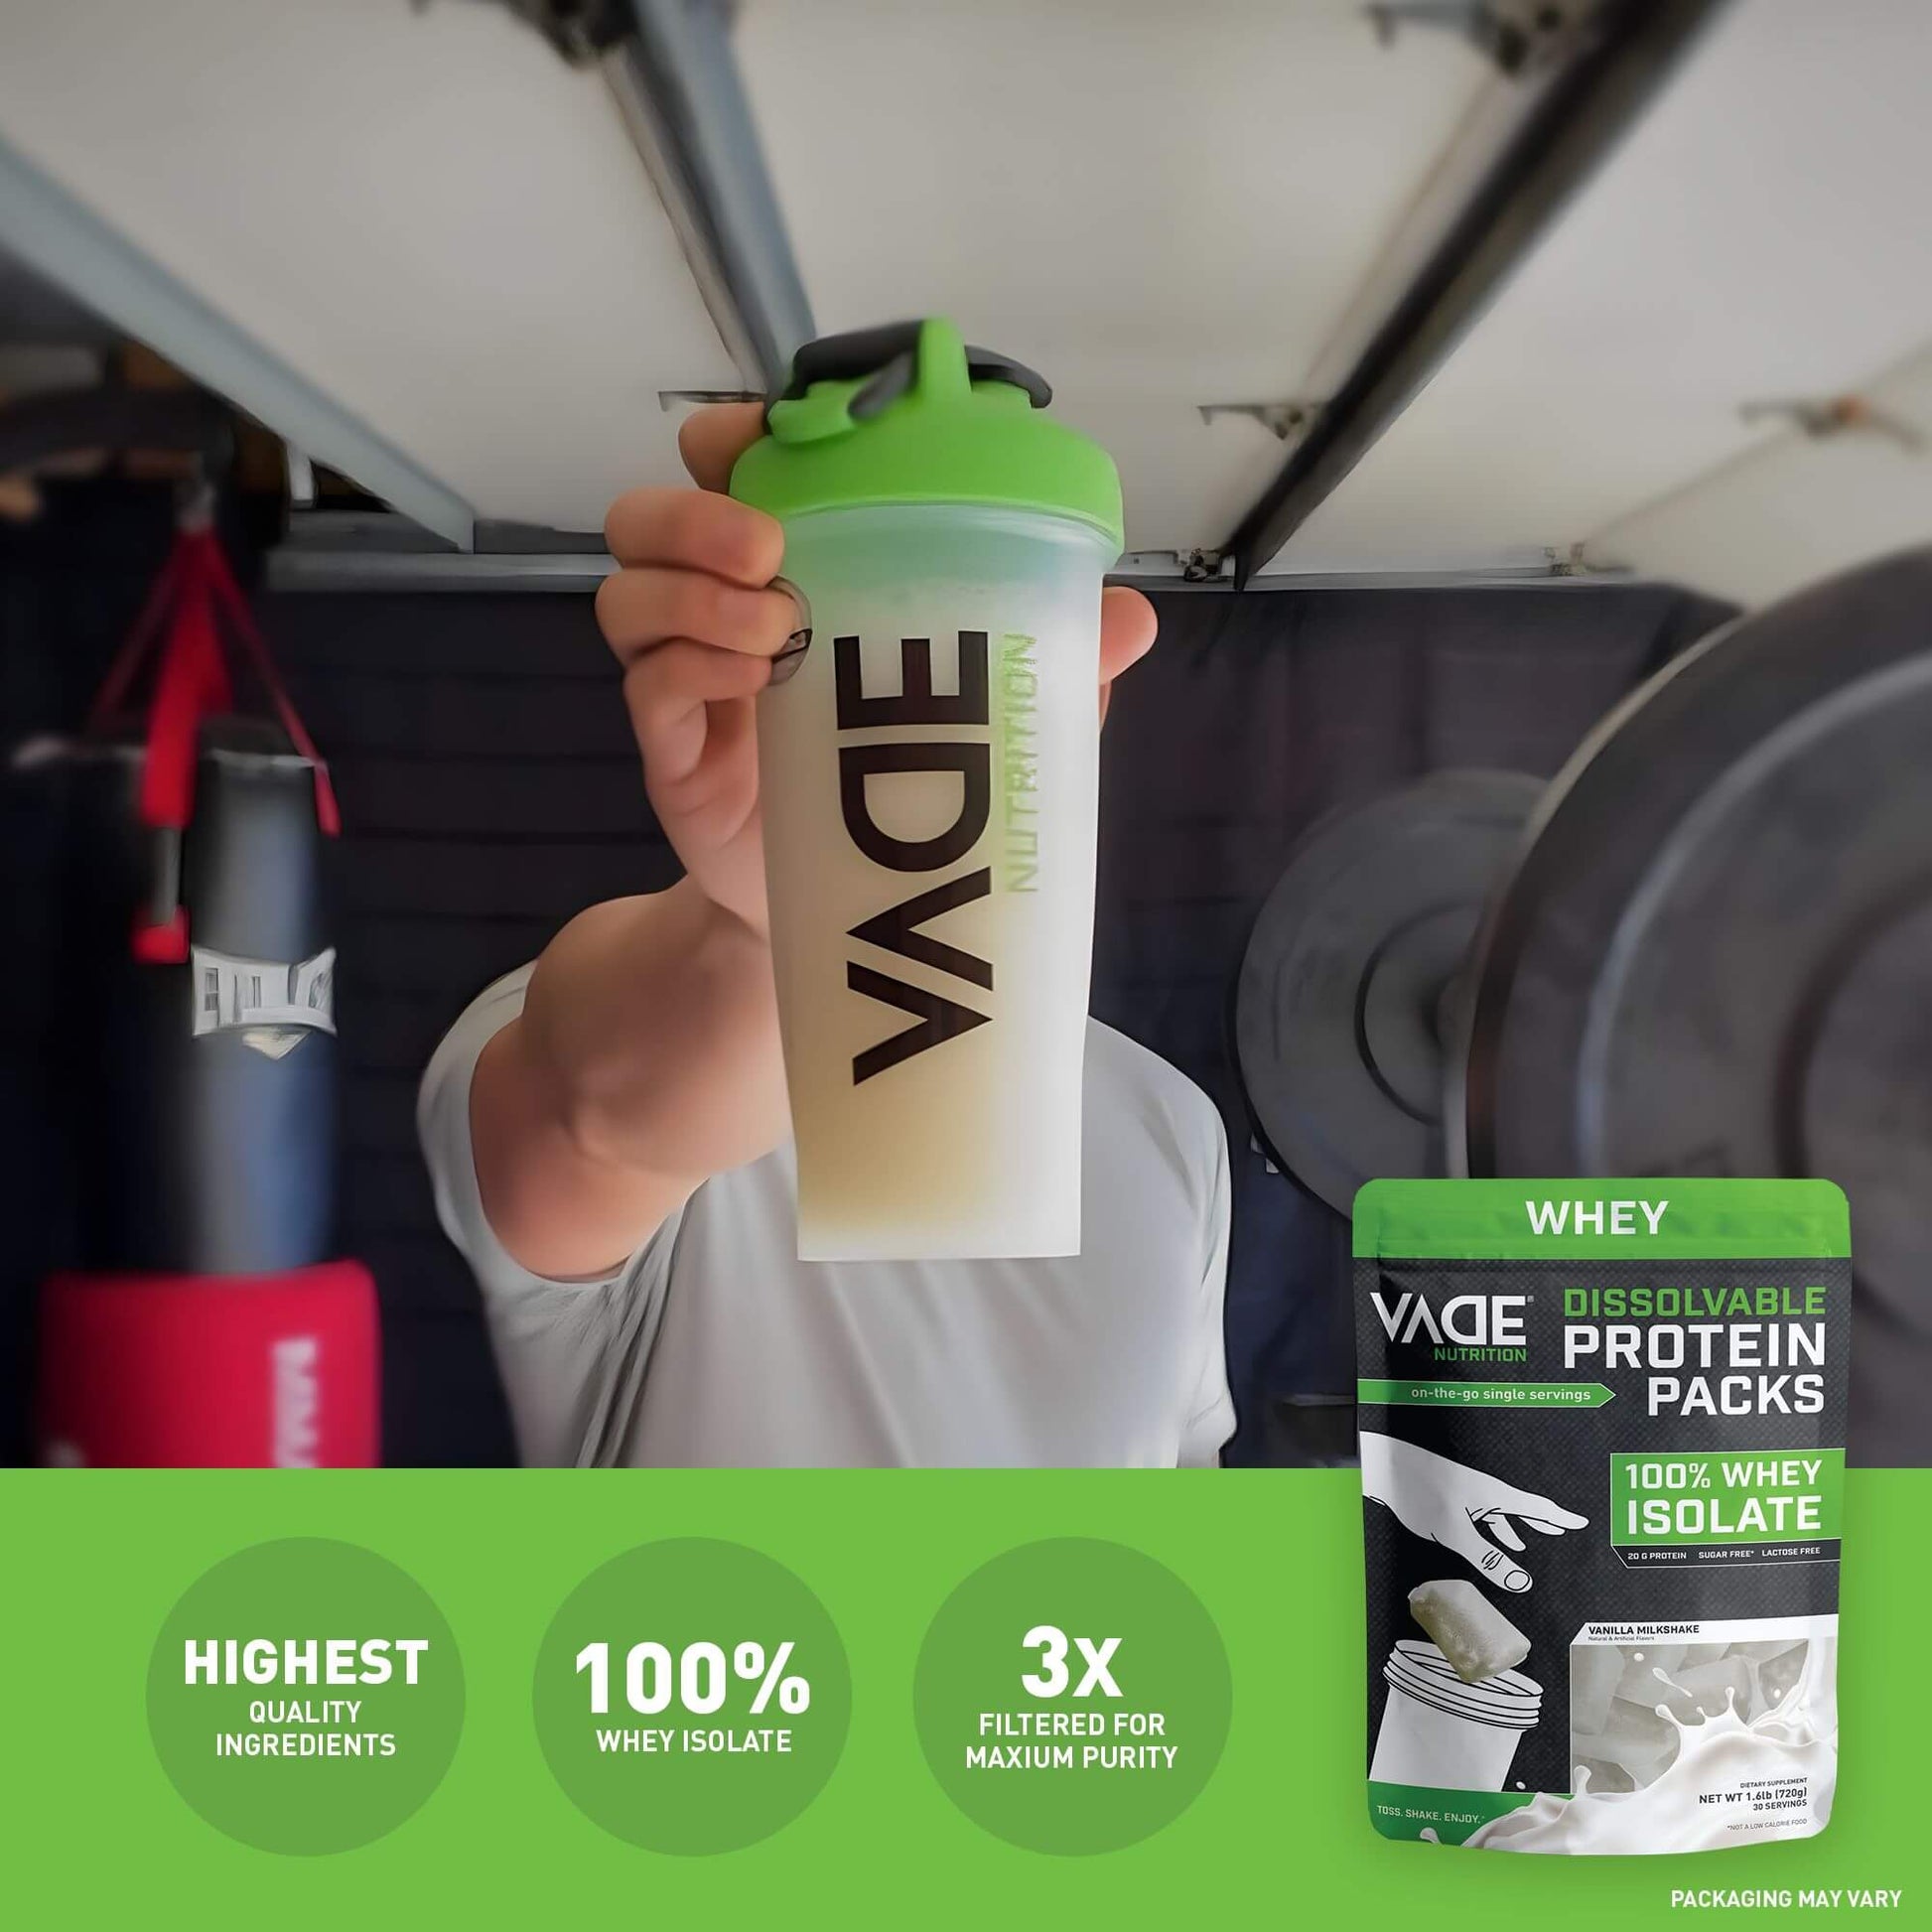 Trying VADE Nutrition Protein from Shark Tank